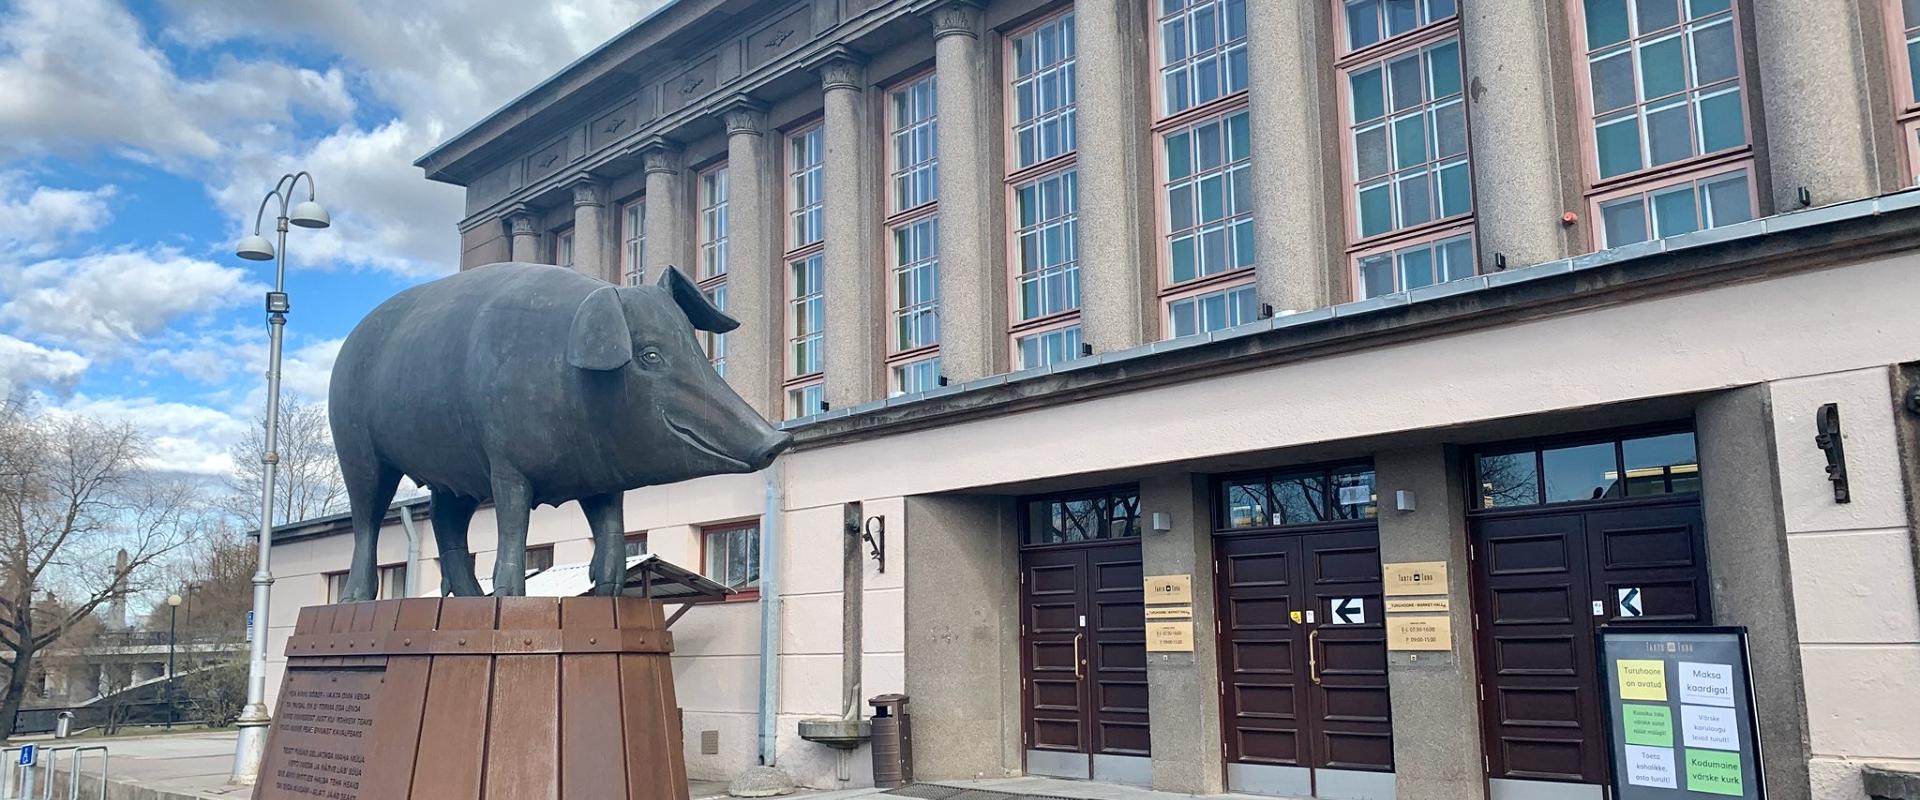 Bronze Pig sculpture in front of the market hall